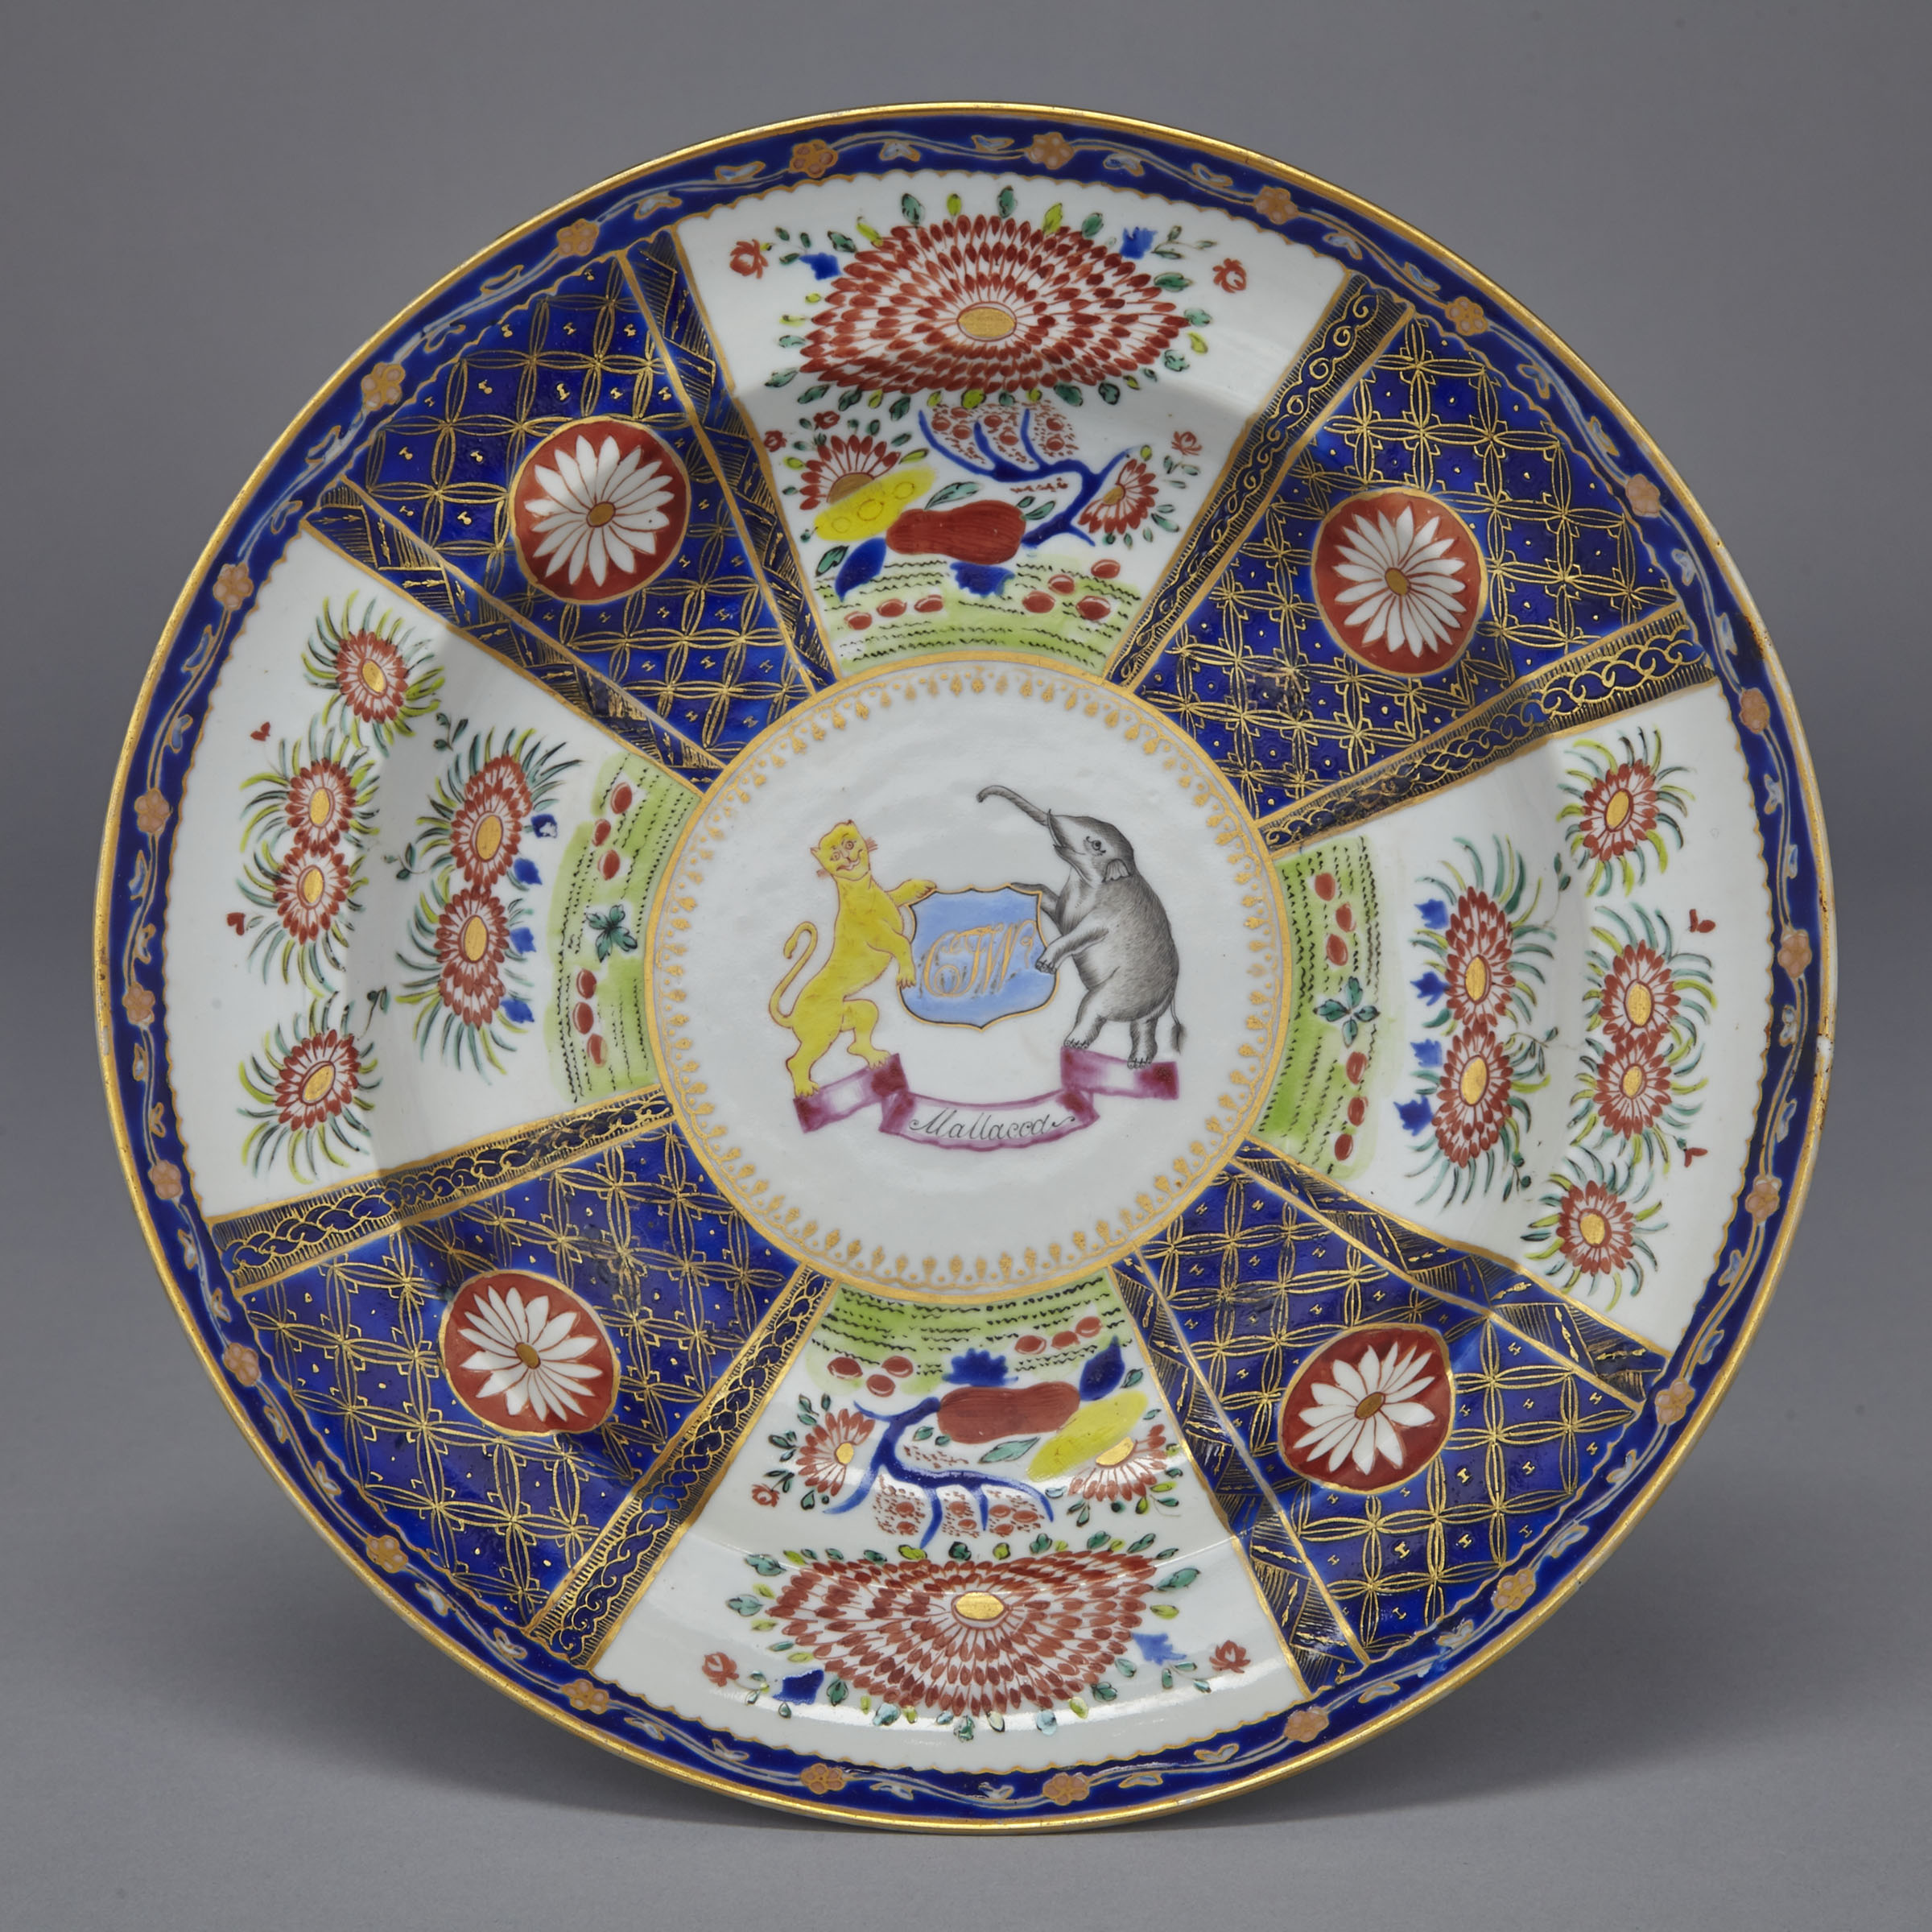 Chinese Export Japan Pattern Armorial Soup Plate, from the Wolterbeek Service, c.1818